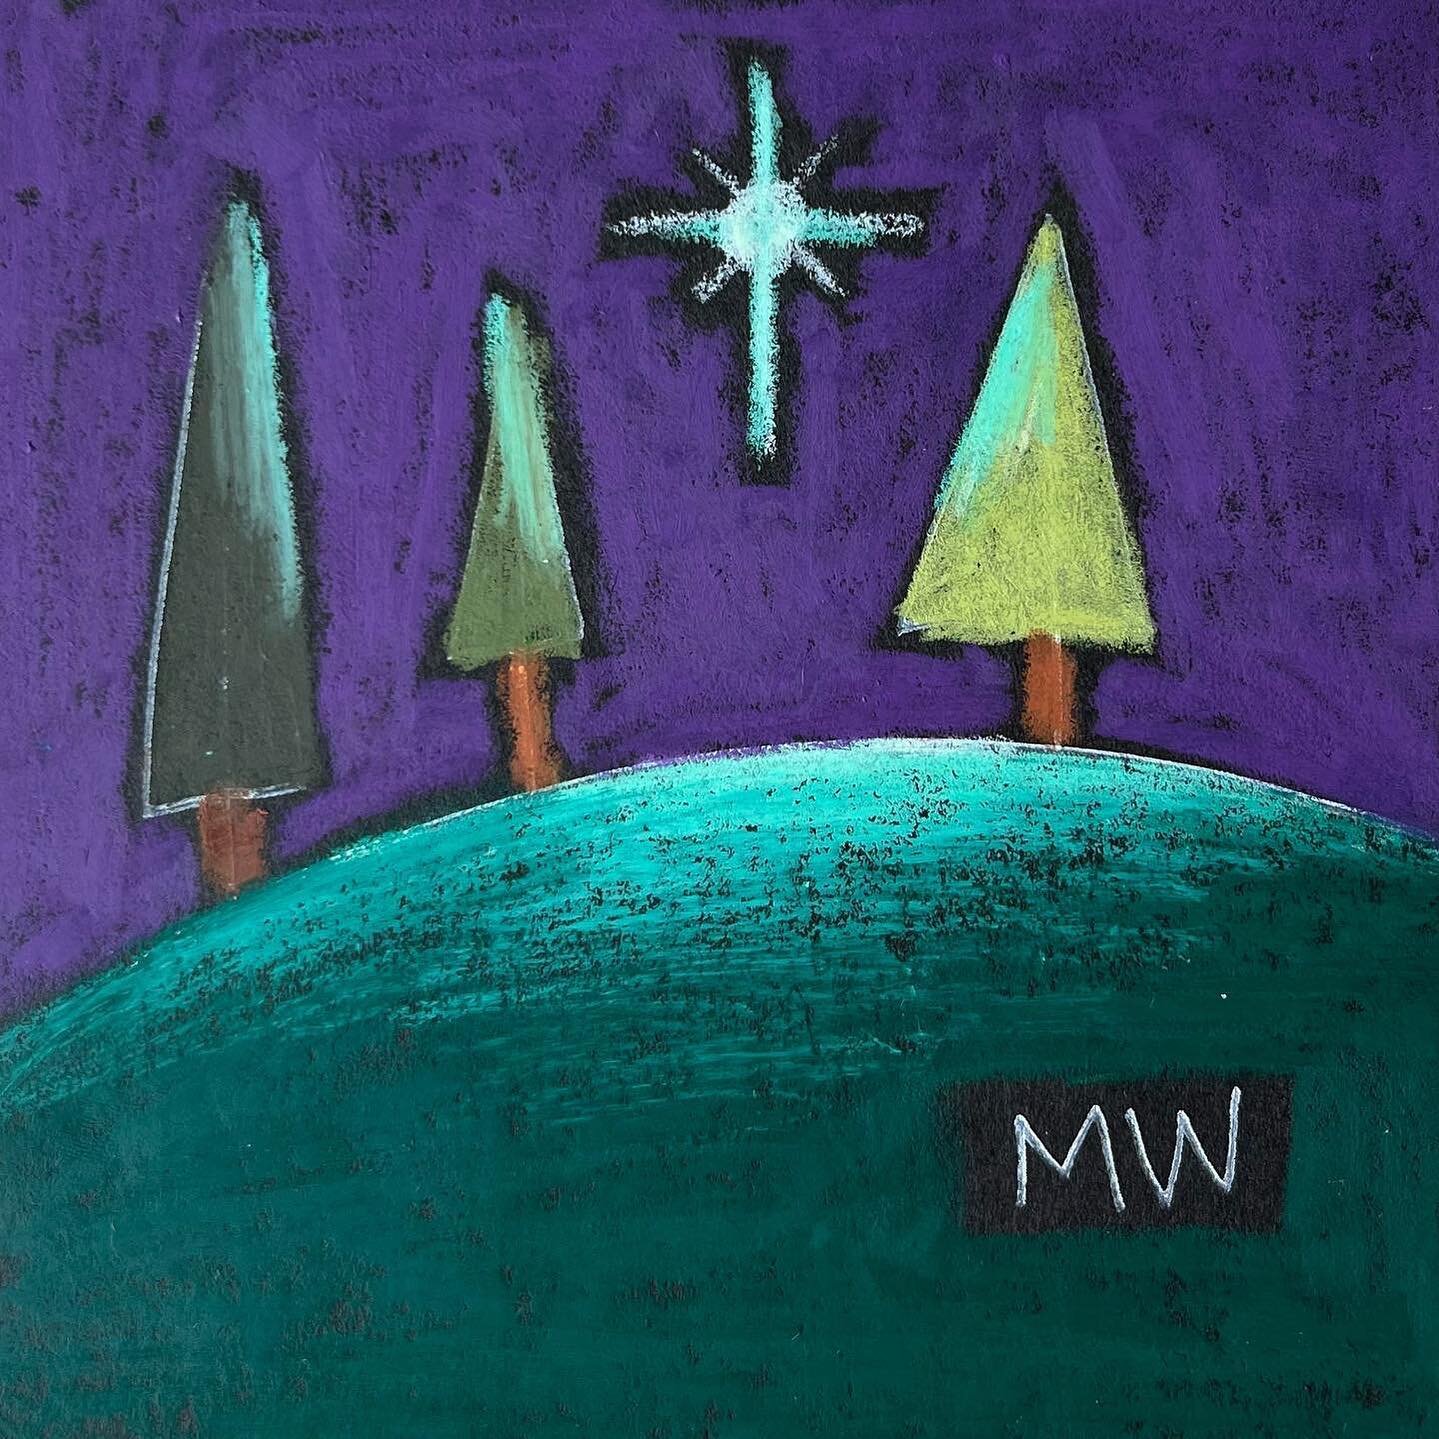 Star Of Wonder

A delightful Christmas invitation to dwell on the Star Of Wonder.

Would go perfectly on a shelf, or framed generously and hung on a wall.

Get ready for Christmas! 🎄 

4X4 inches

Oil pastels and love on black watercolor paper.